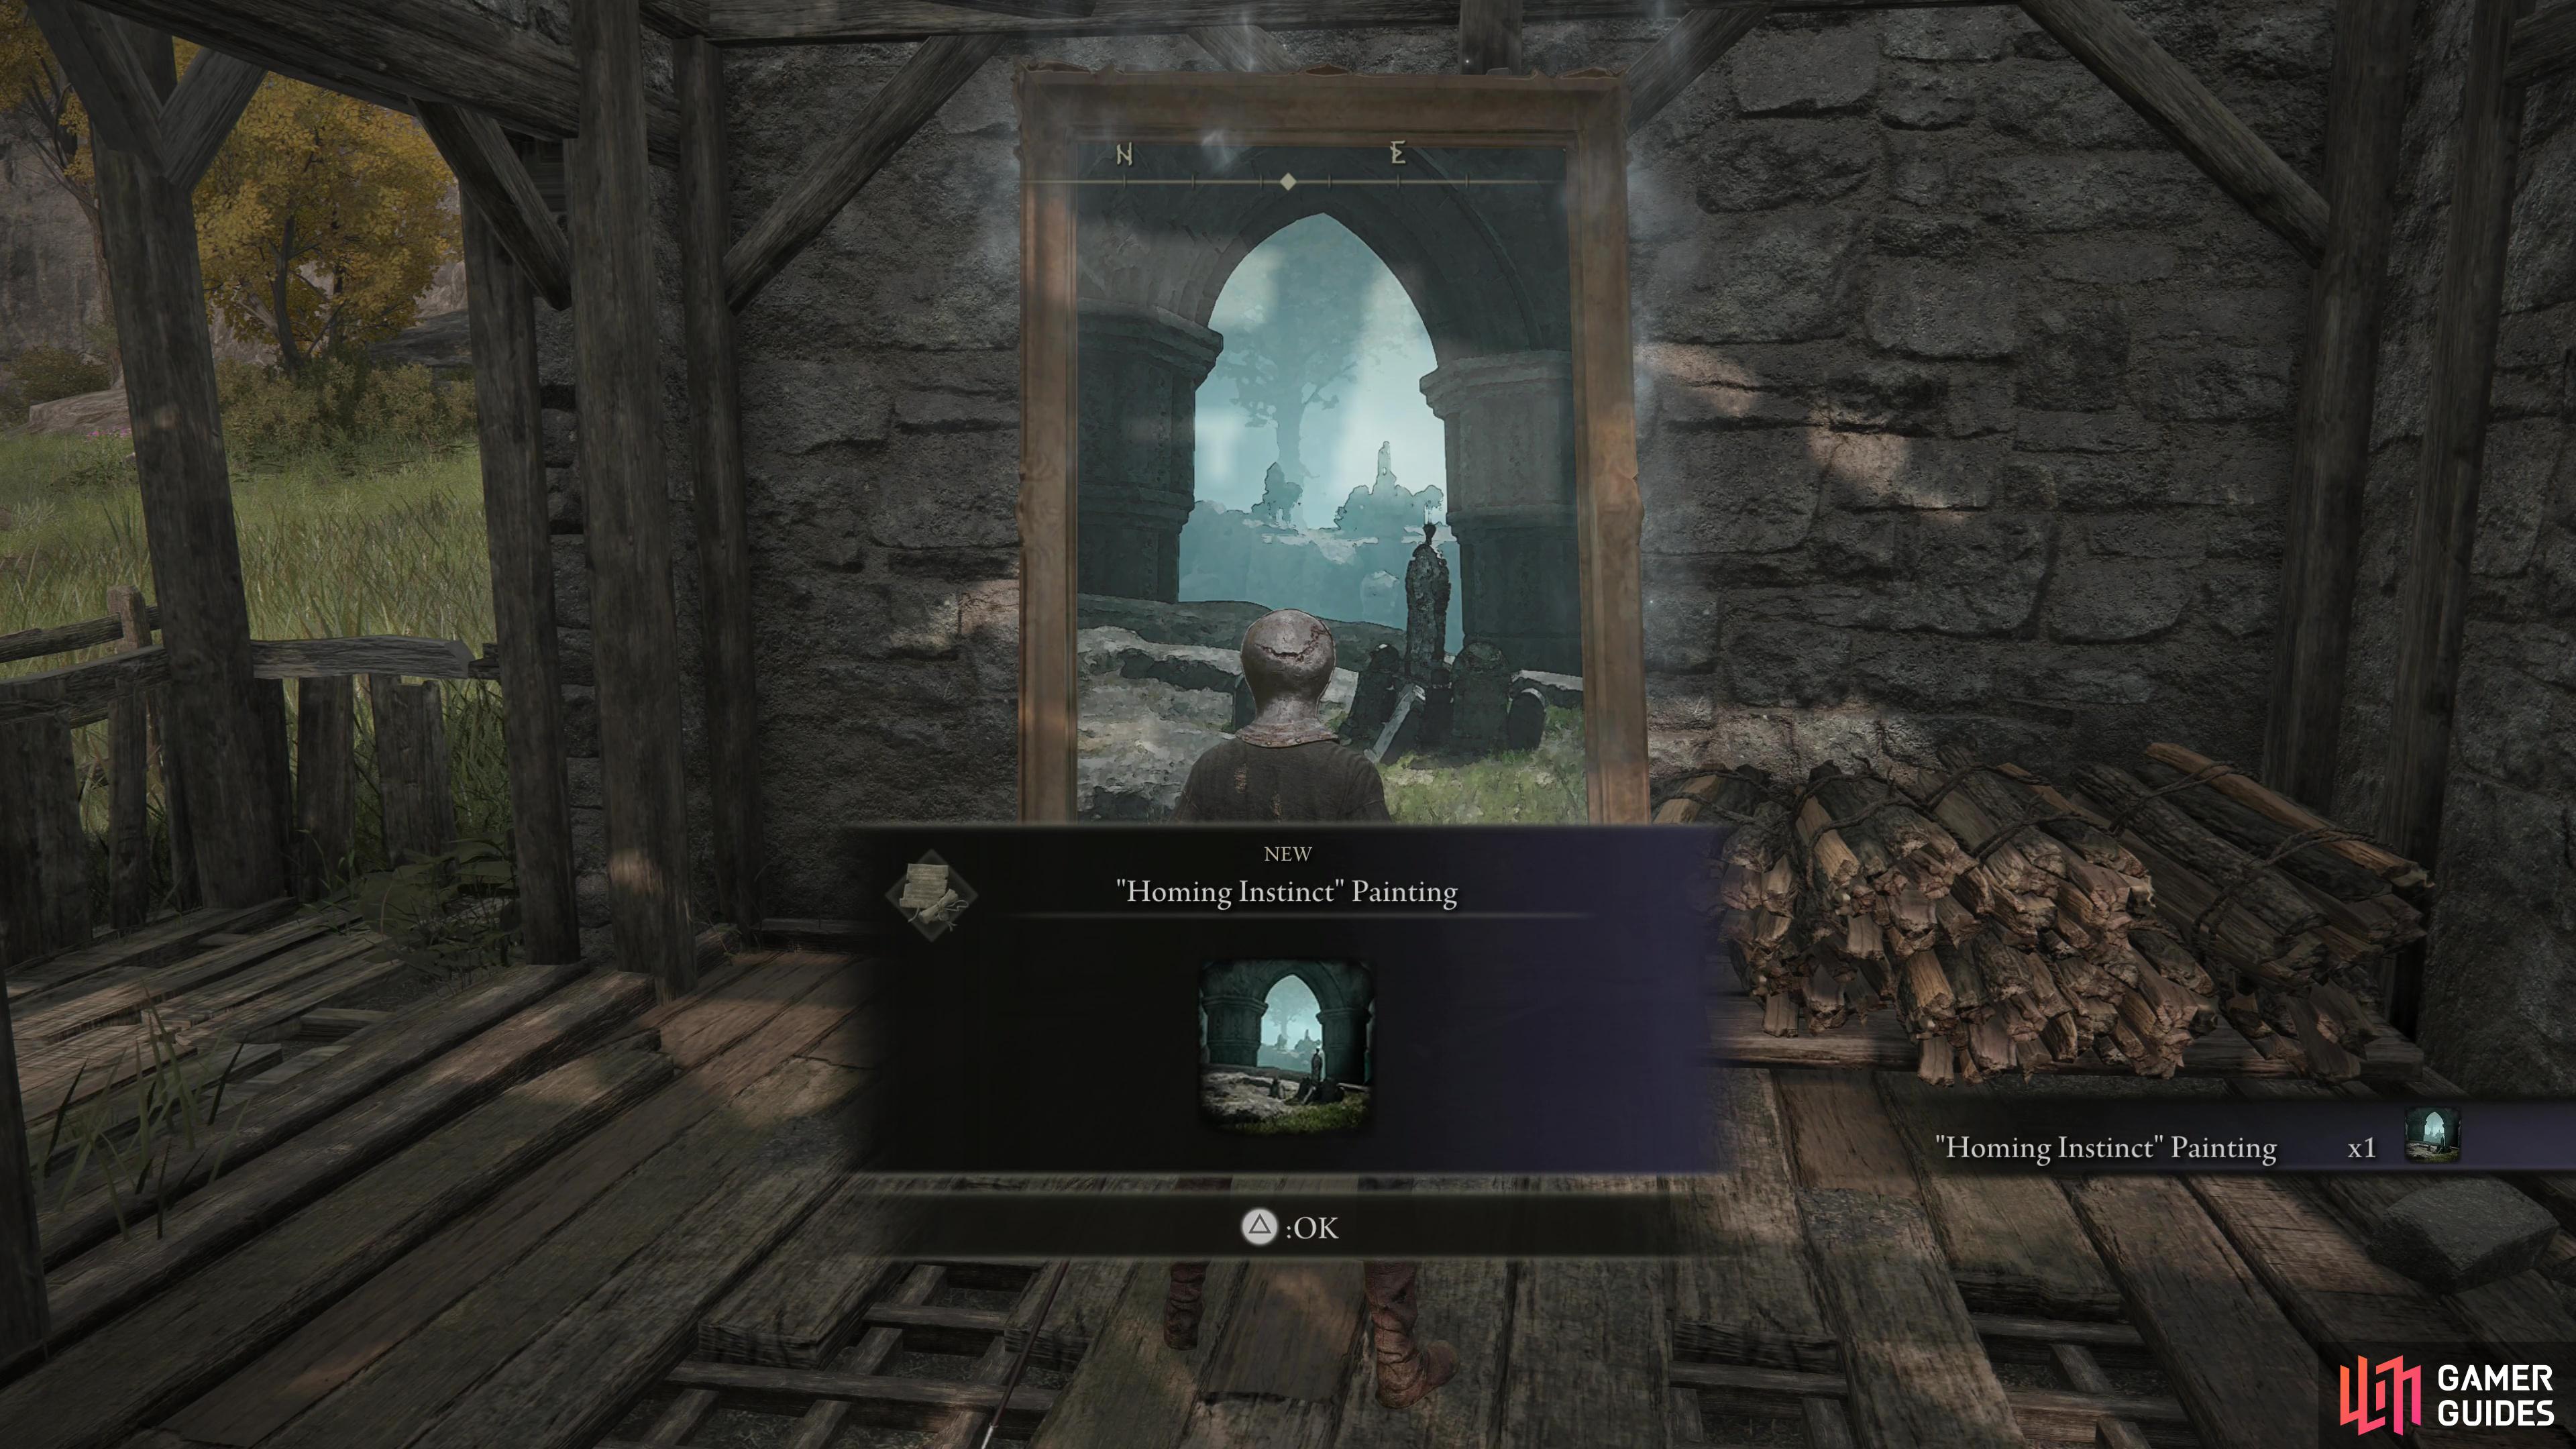 Search a painting in the Artist’s Shack to acquire the Homing Instinct Painting.